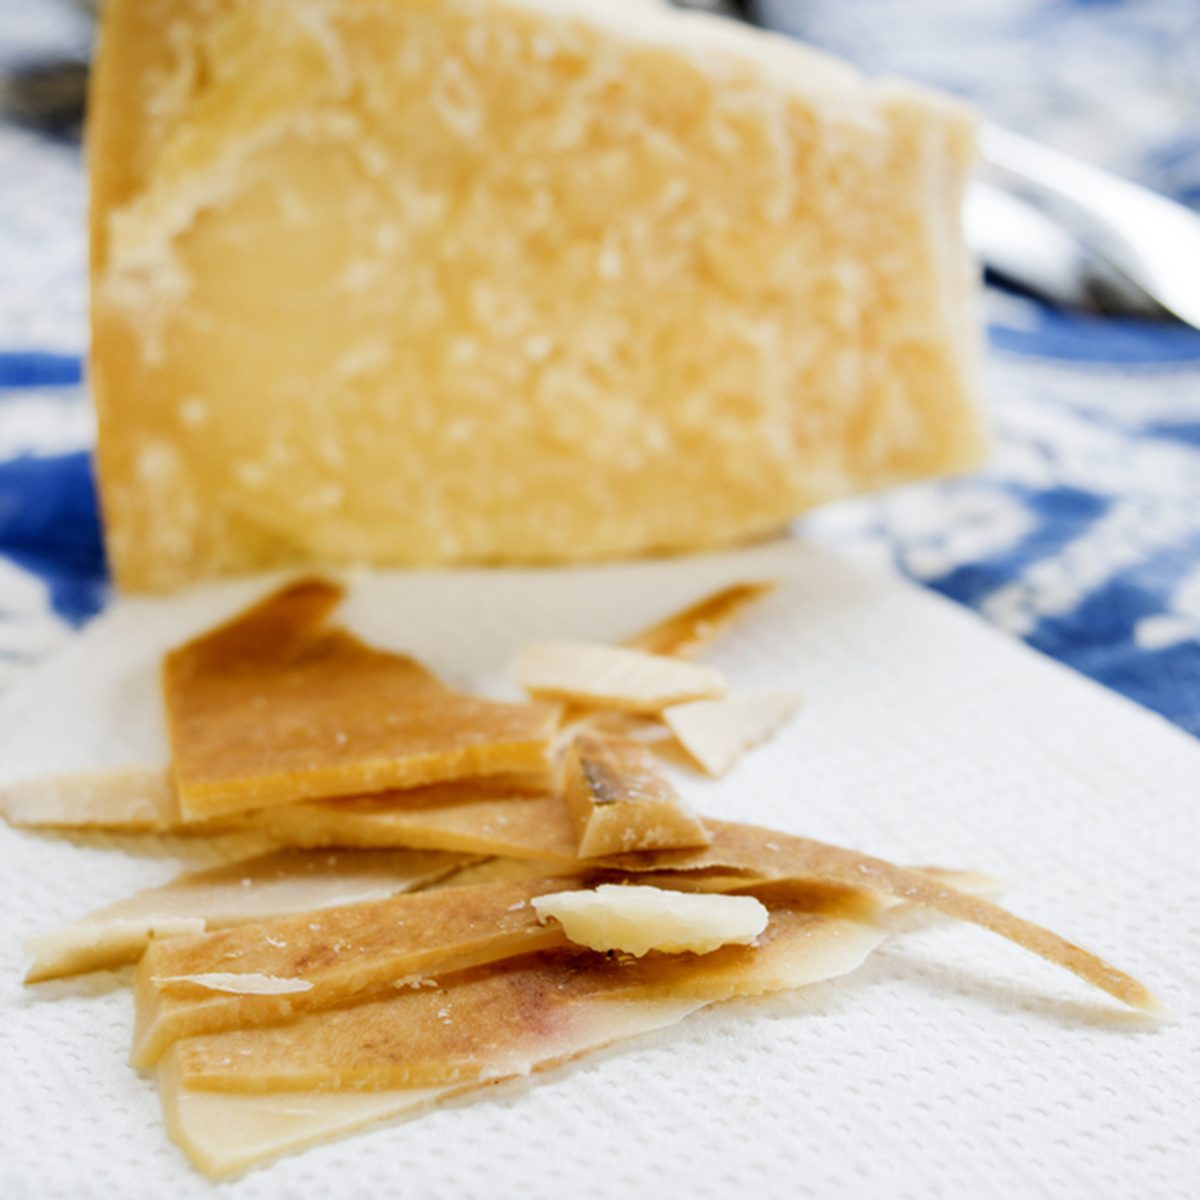 chunks and rind of parmigiano cheese with near a big piece of heart